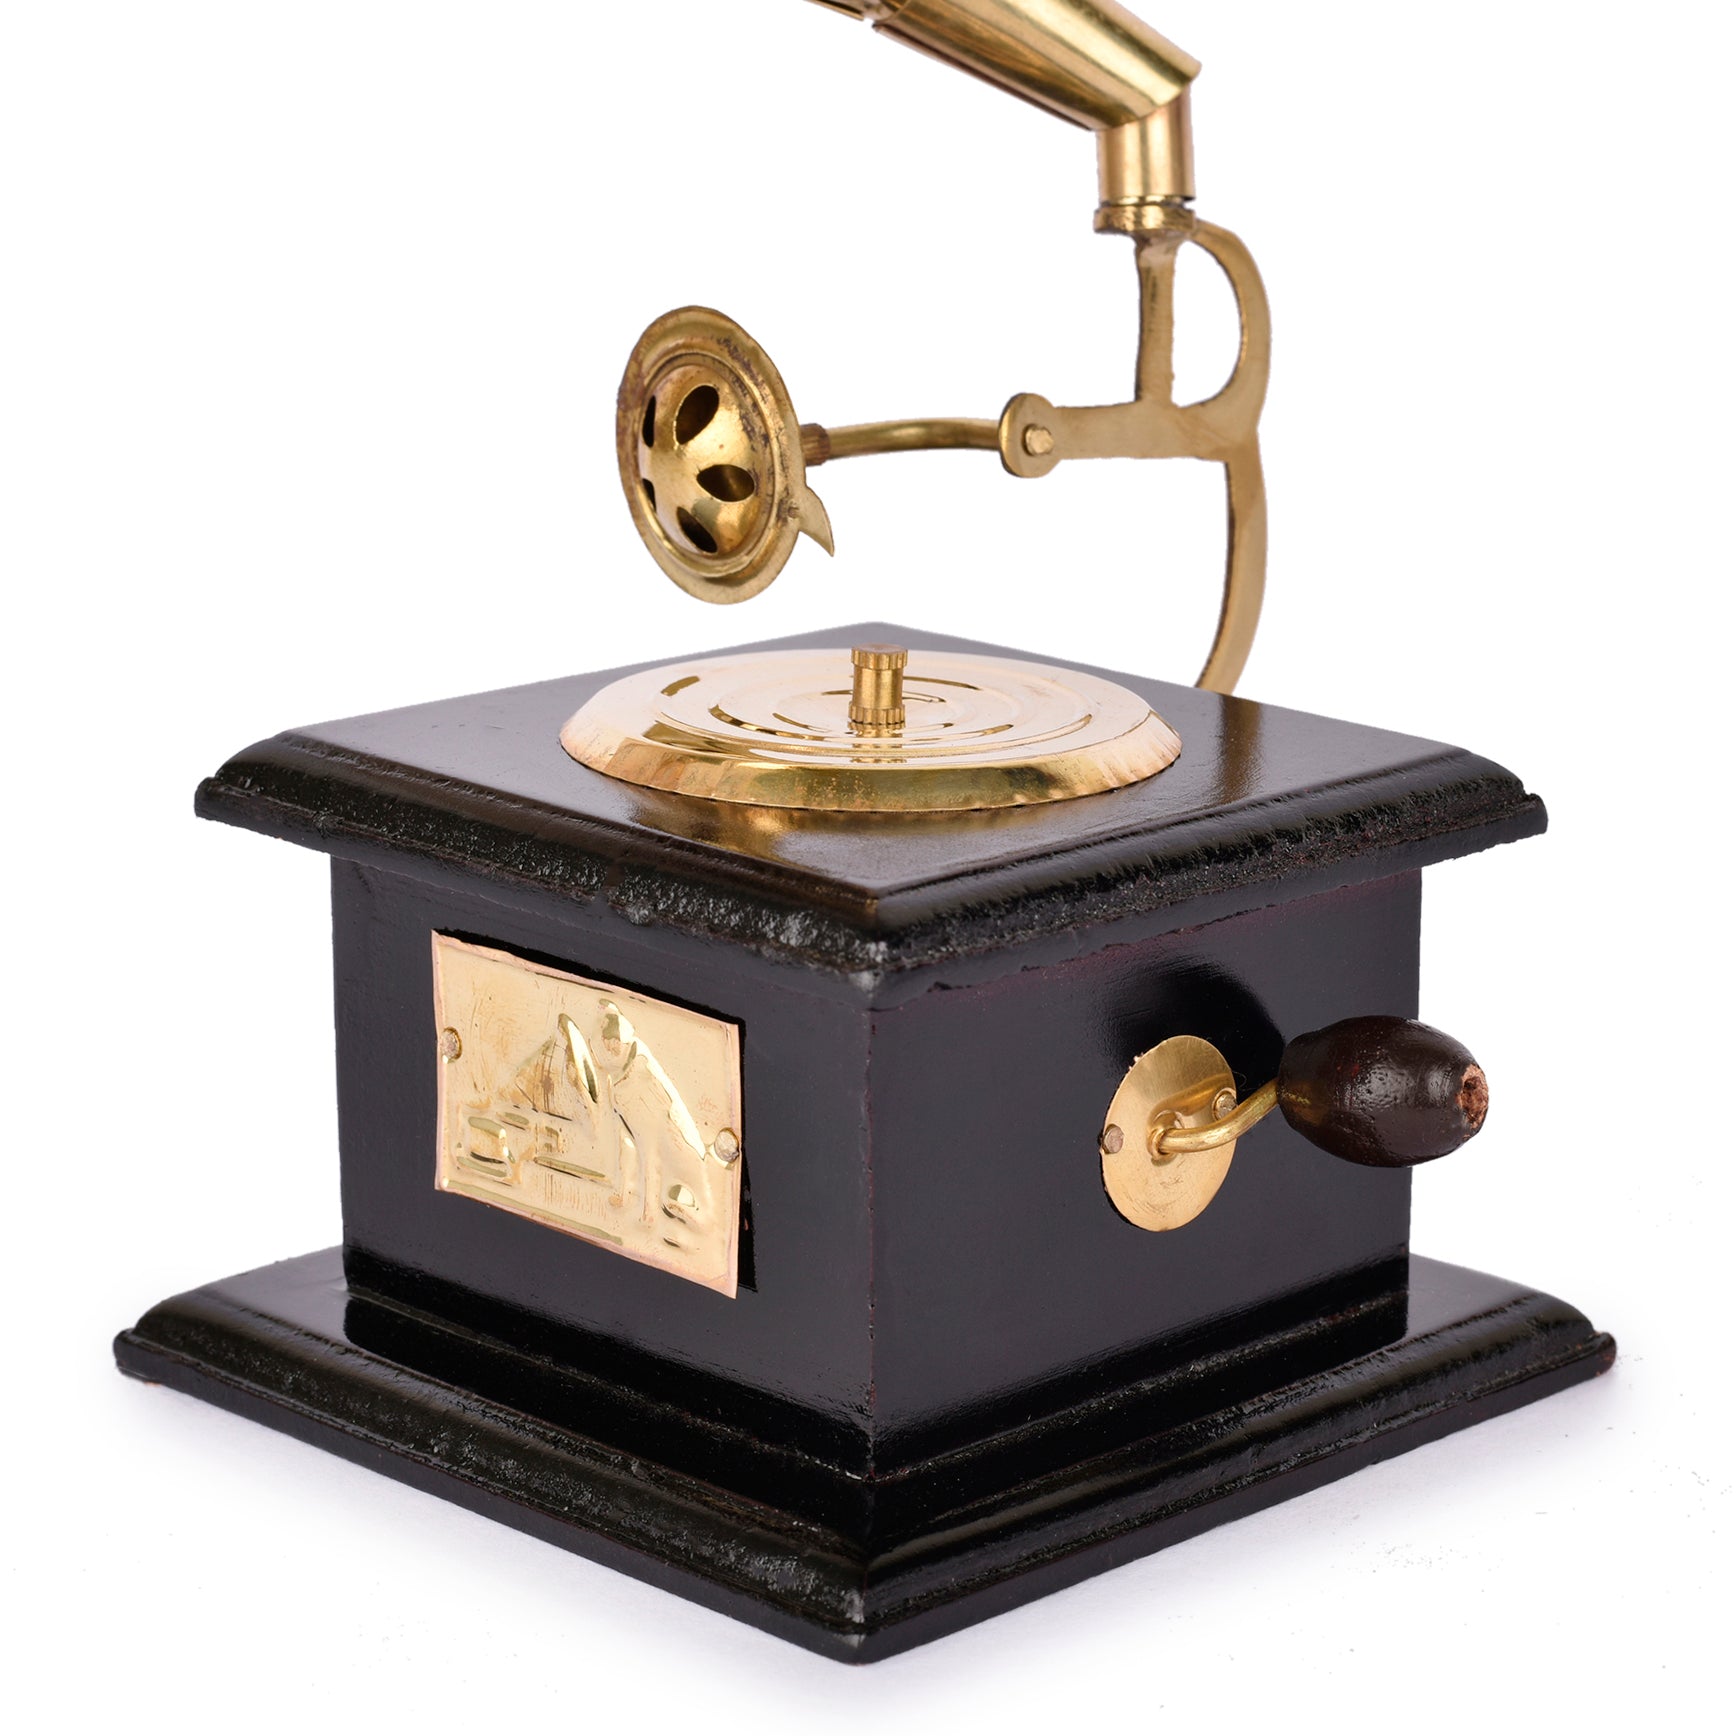 Gold-Toned Handcrafted Antique Music Decorative Gramophone Showpiece - 6 inches